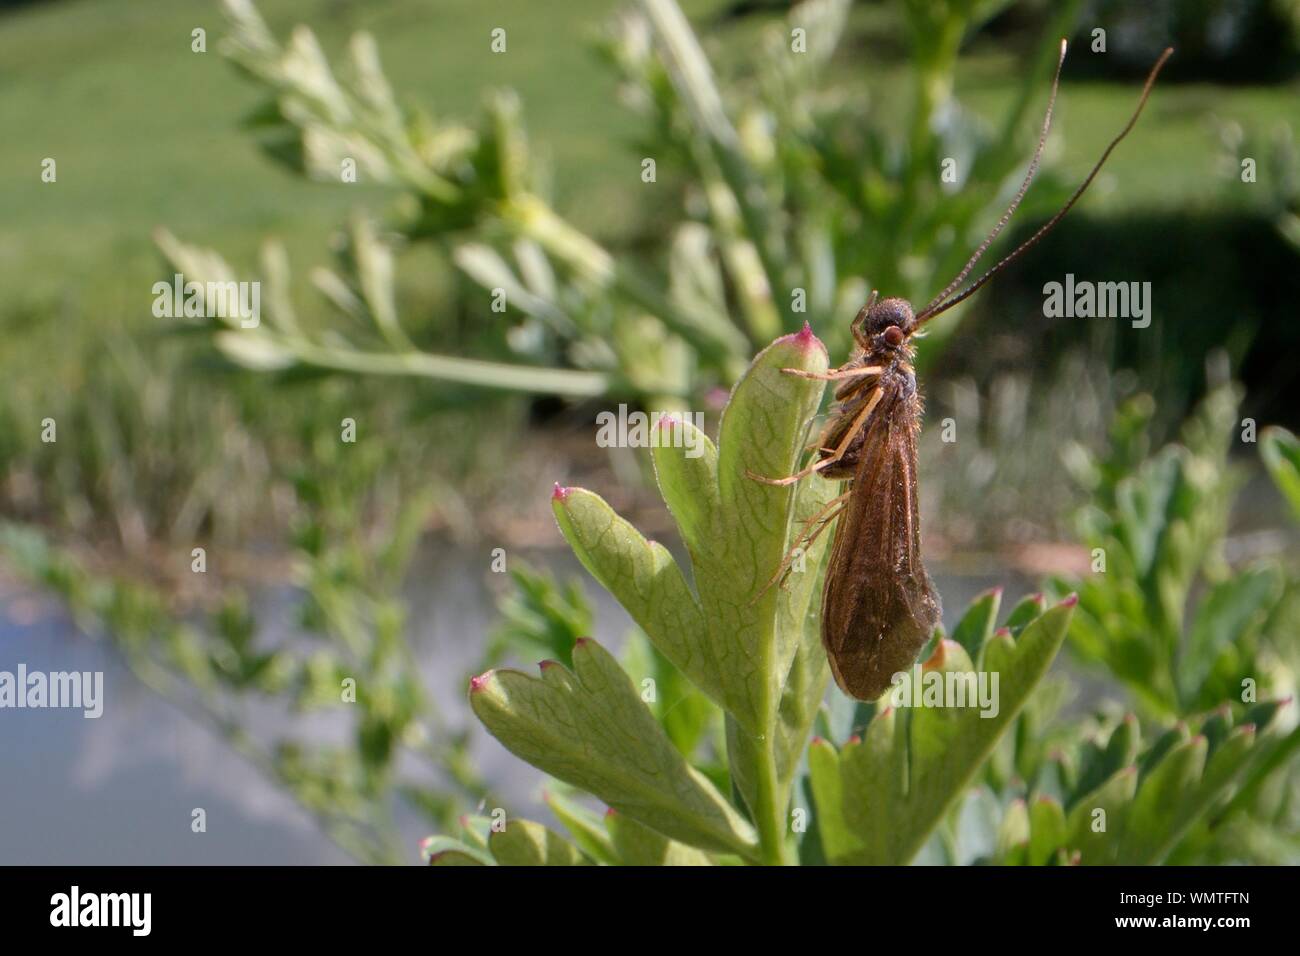 Caddis fly (Trichoptera) resting on riverbank vegetation, Wiltshire, UK, May. Stock Photo